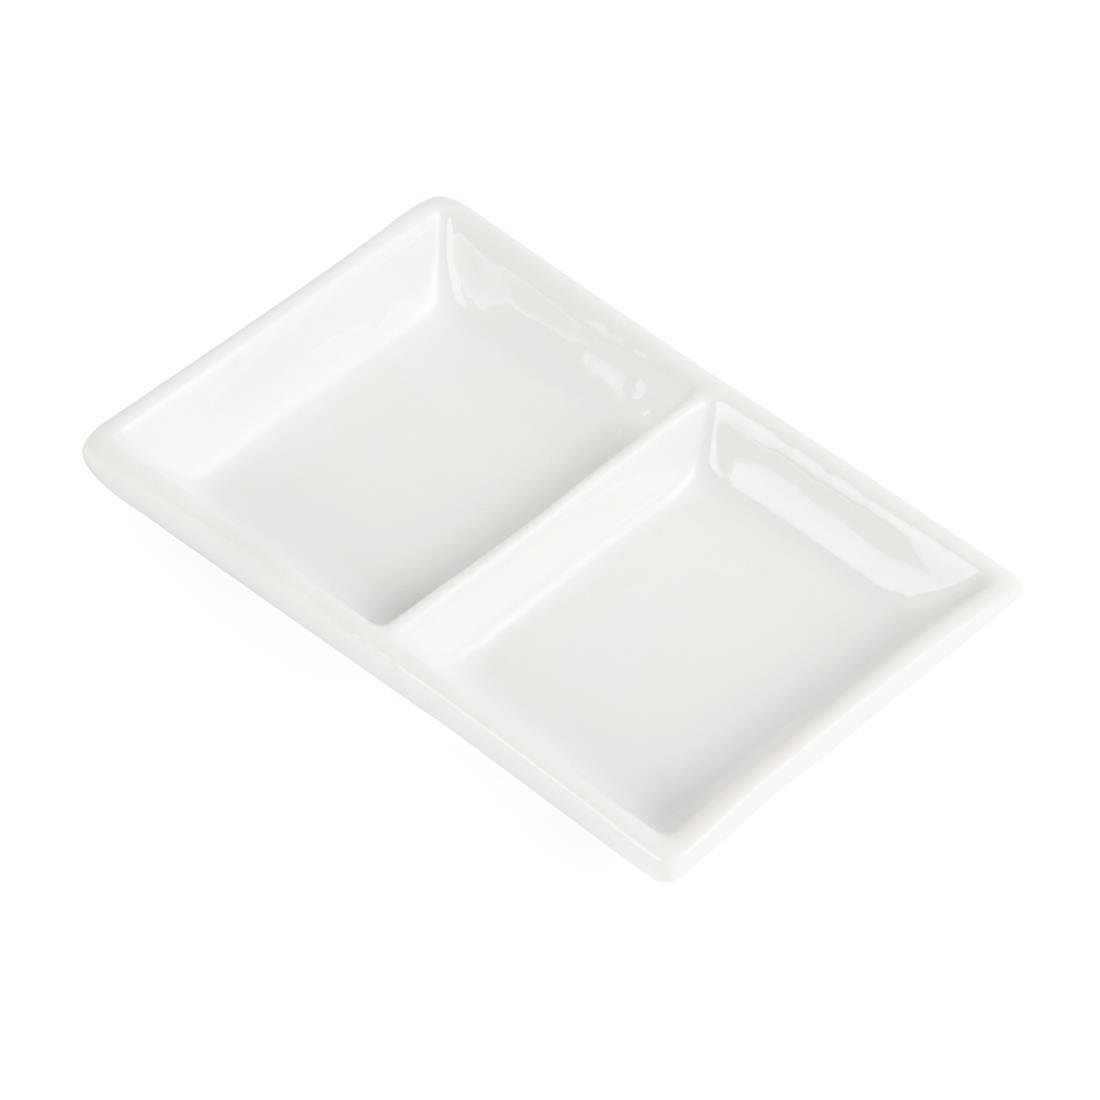 Olympia Whiteware 2 Section Dishes (Pack of 12) - C335  - 3